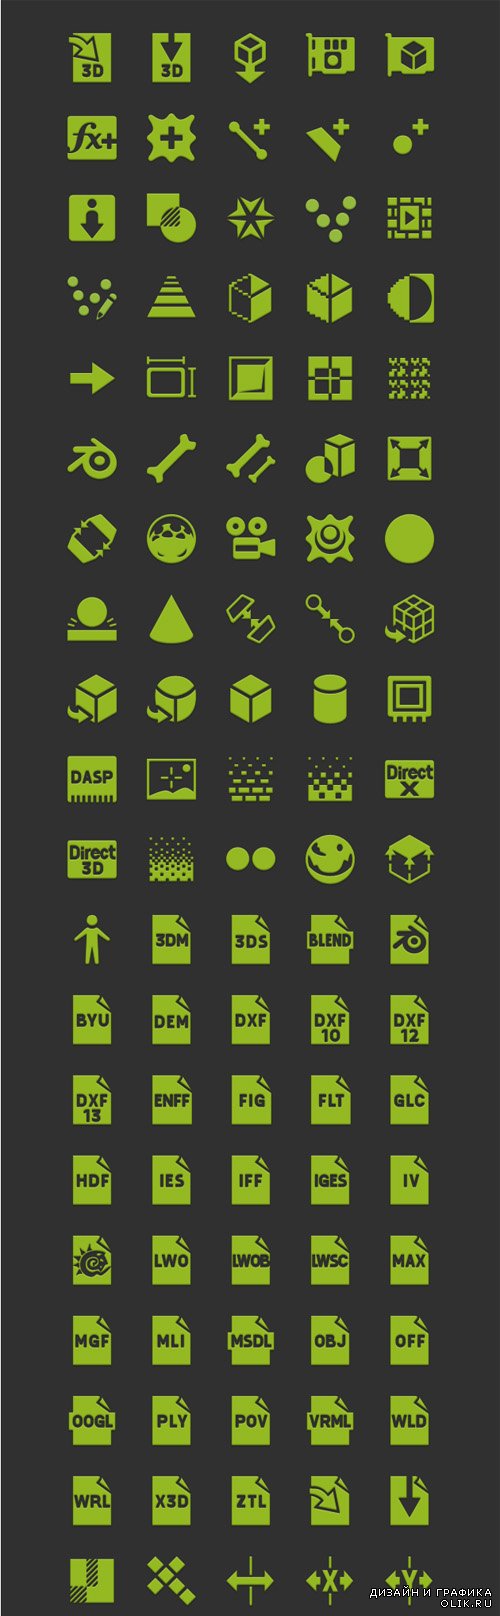 Android 3D Graphics Icon Set PSD